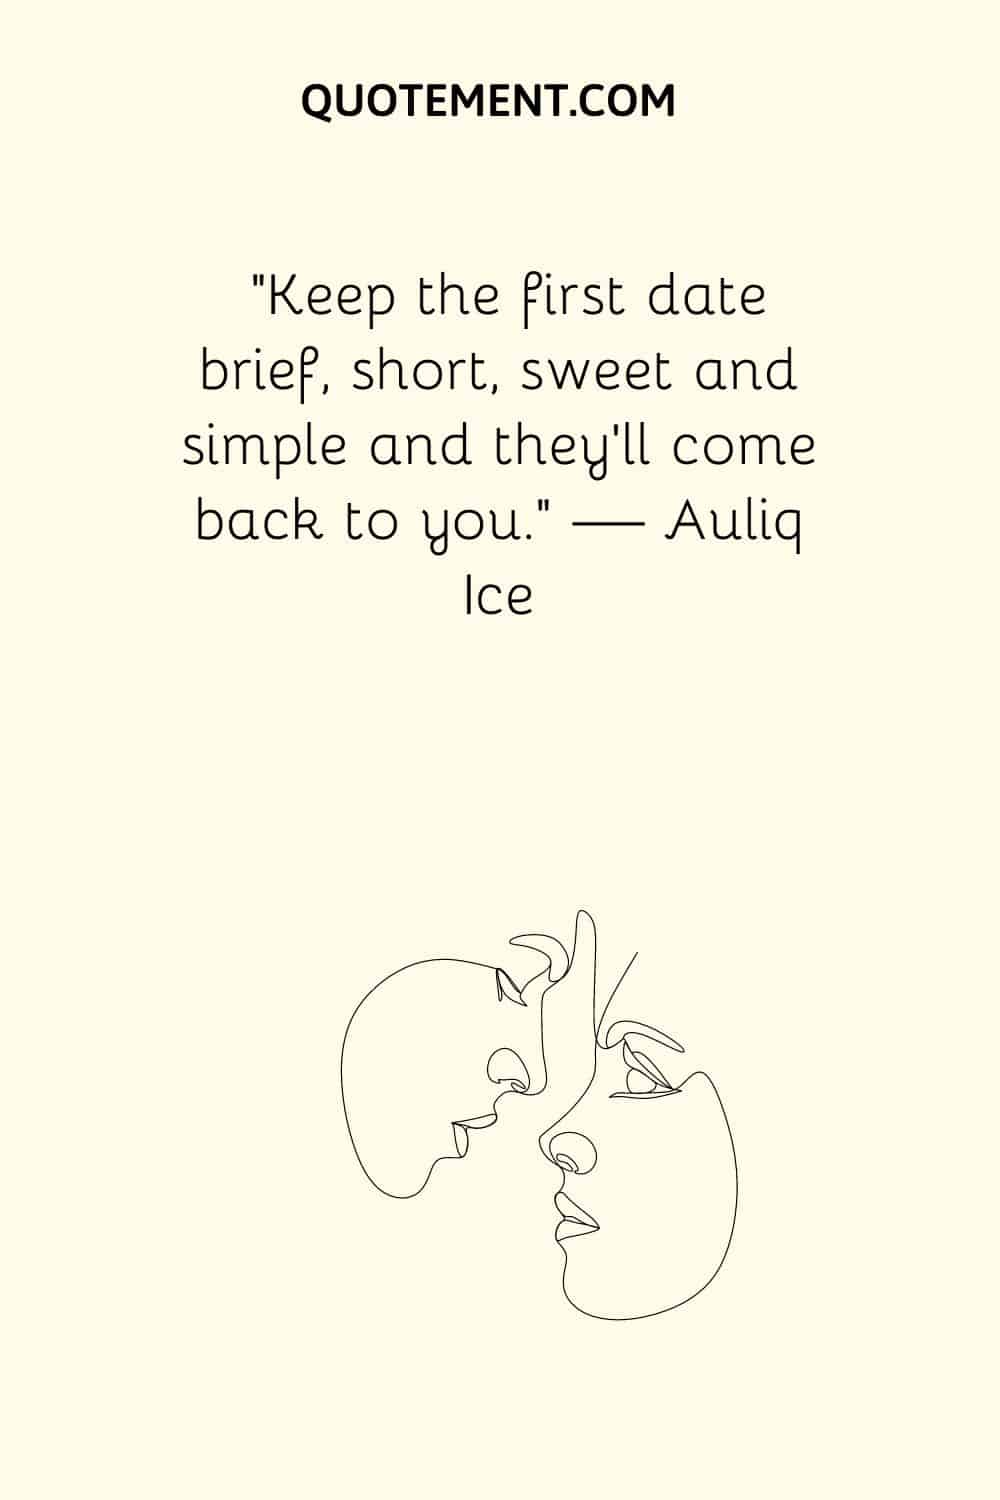 Keep the first date brief, short, sweet and simple and they’ll come back to you